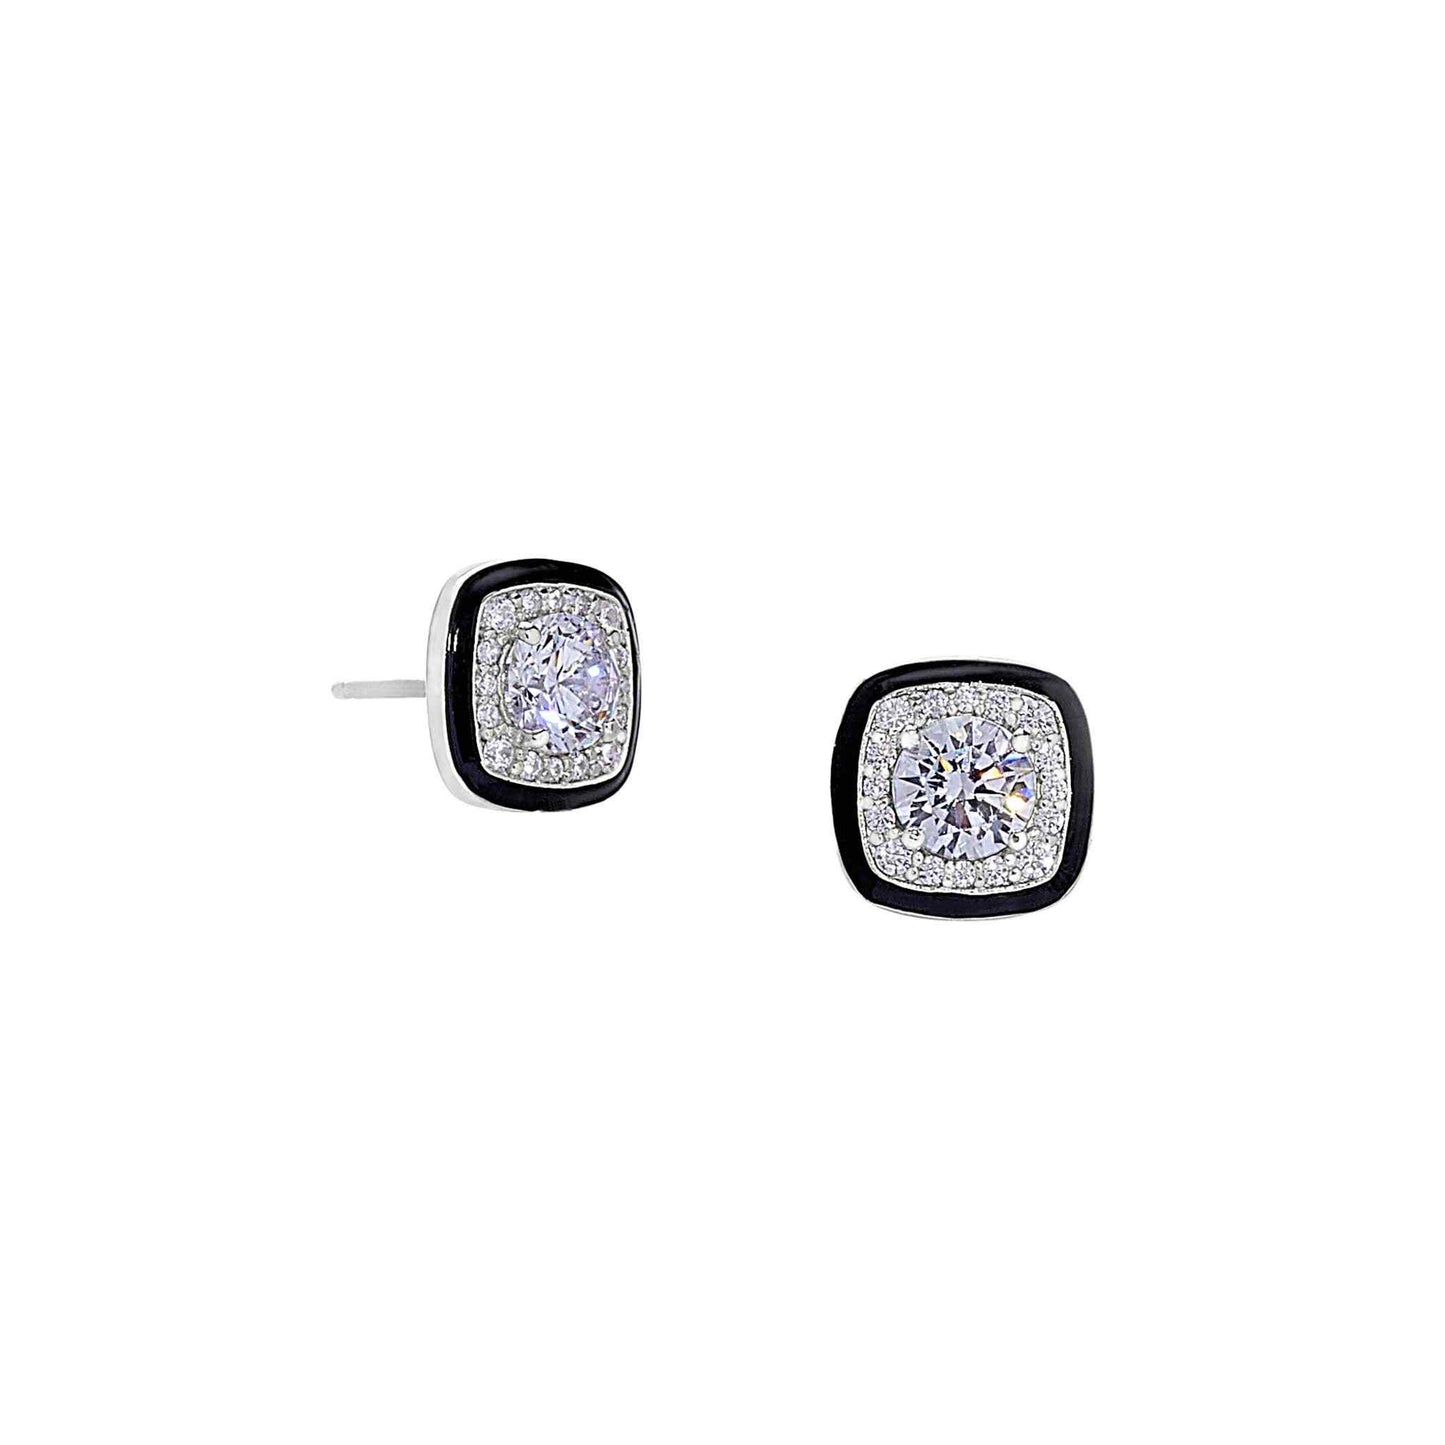 A cushion cut earrings with thin black enamel and simulated diamonds displayed on a neutral white background.